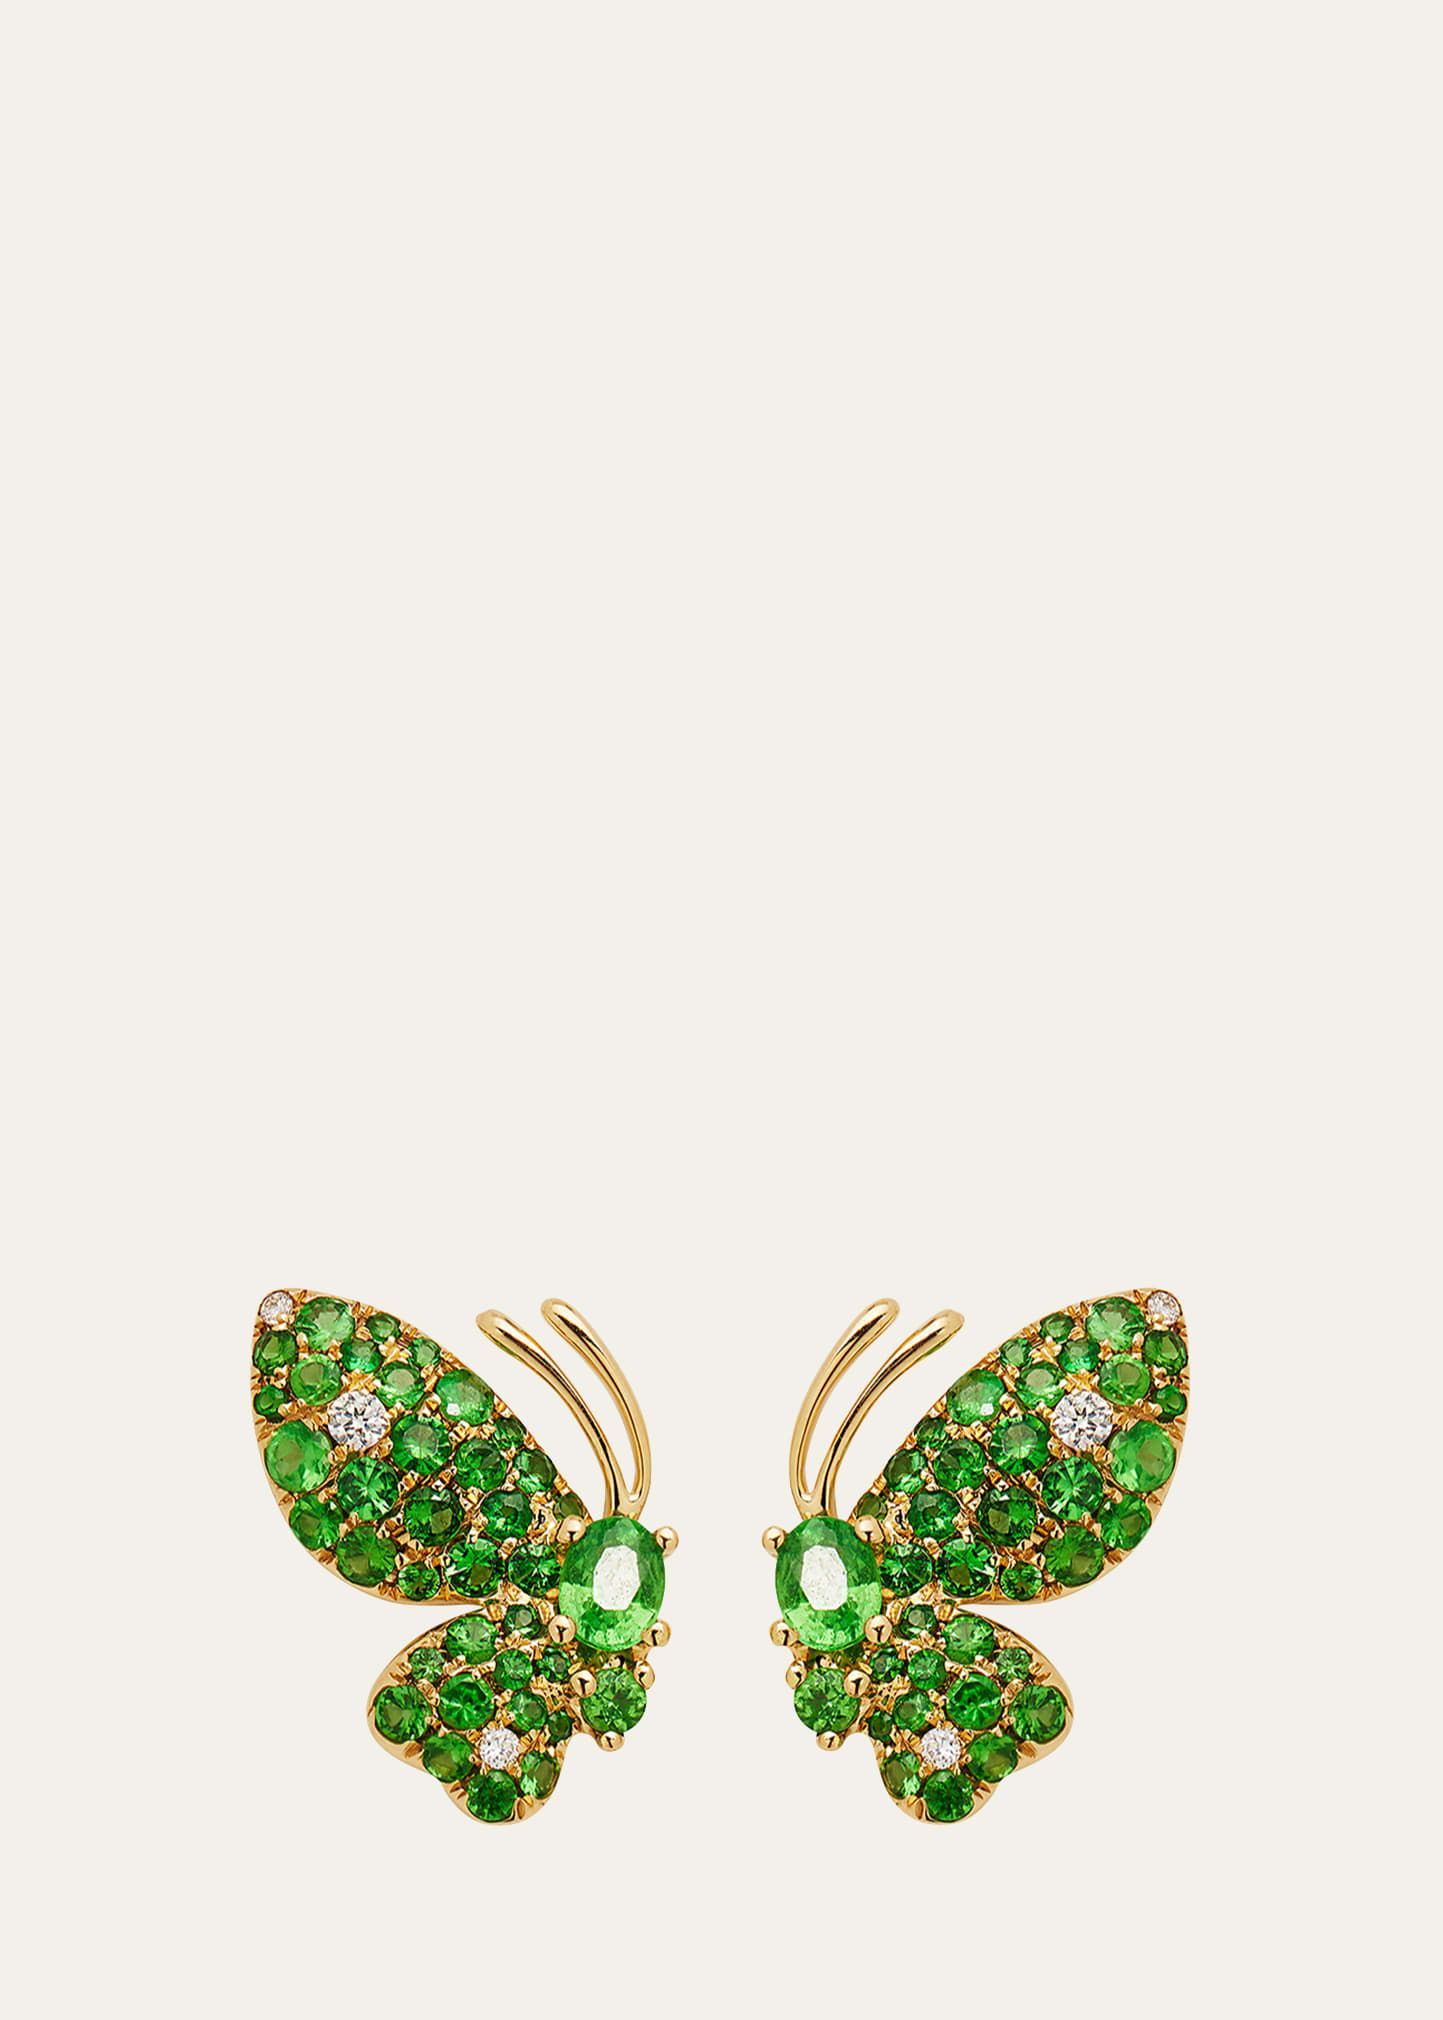 Yellow Gold Green Garnet and White Diamond Earrings from The Butterfly Collection